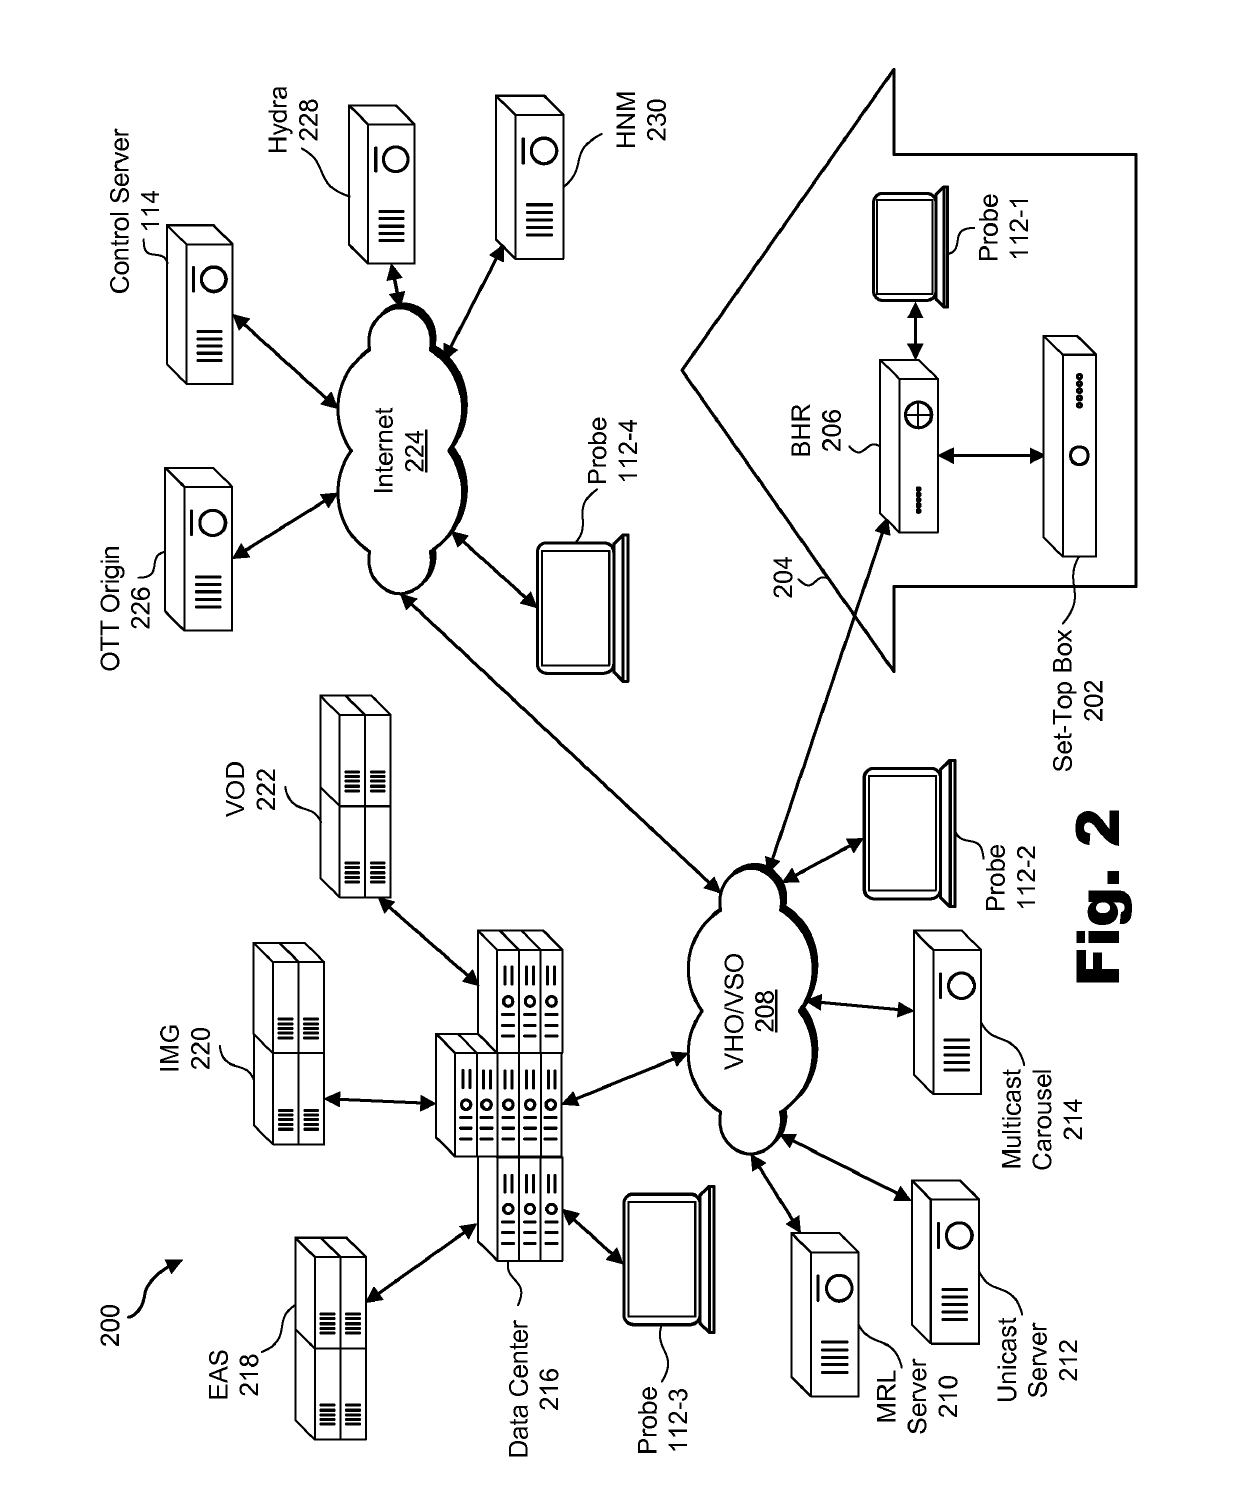 Systems and methods for monitoring operational statuses of network services